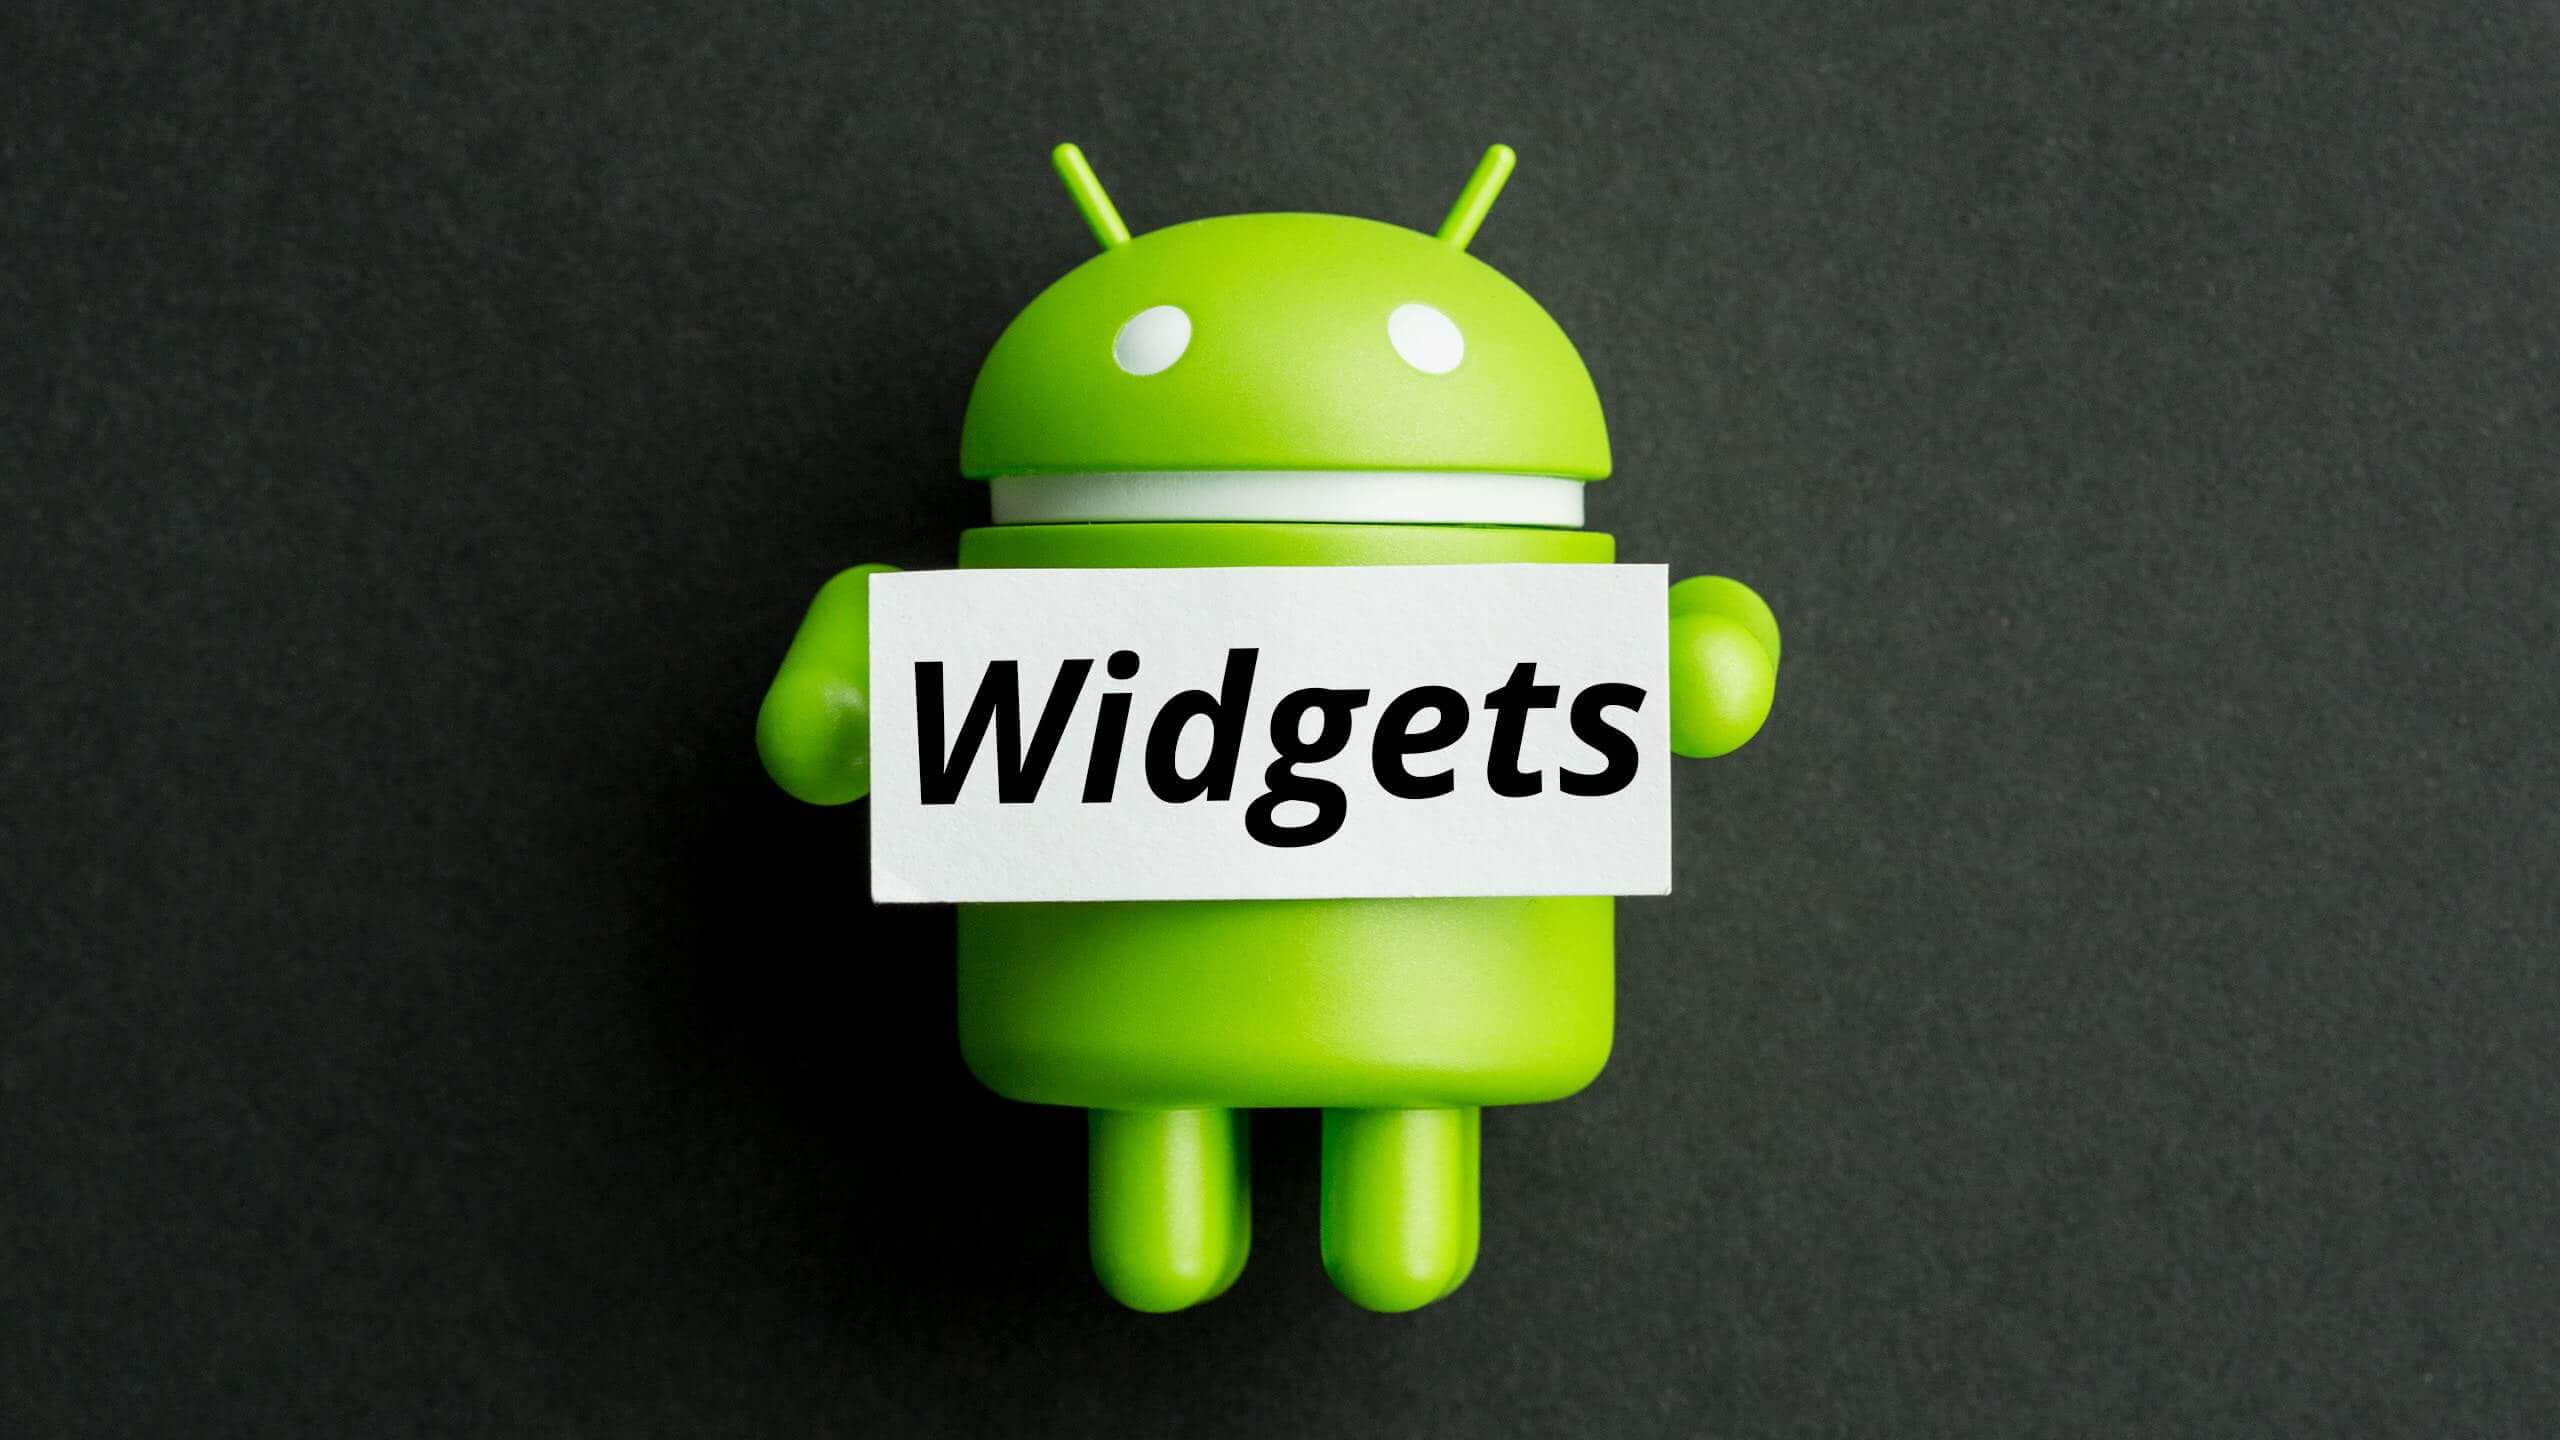 add or resize widgets on Android